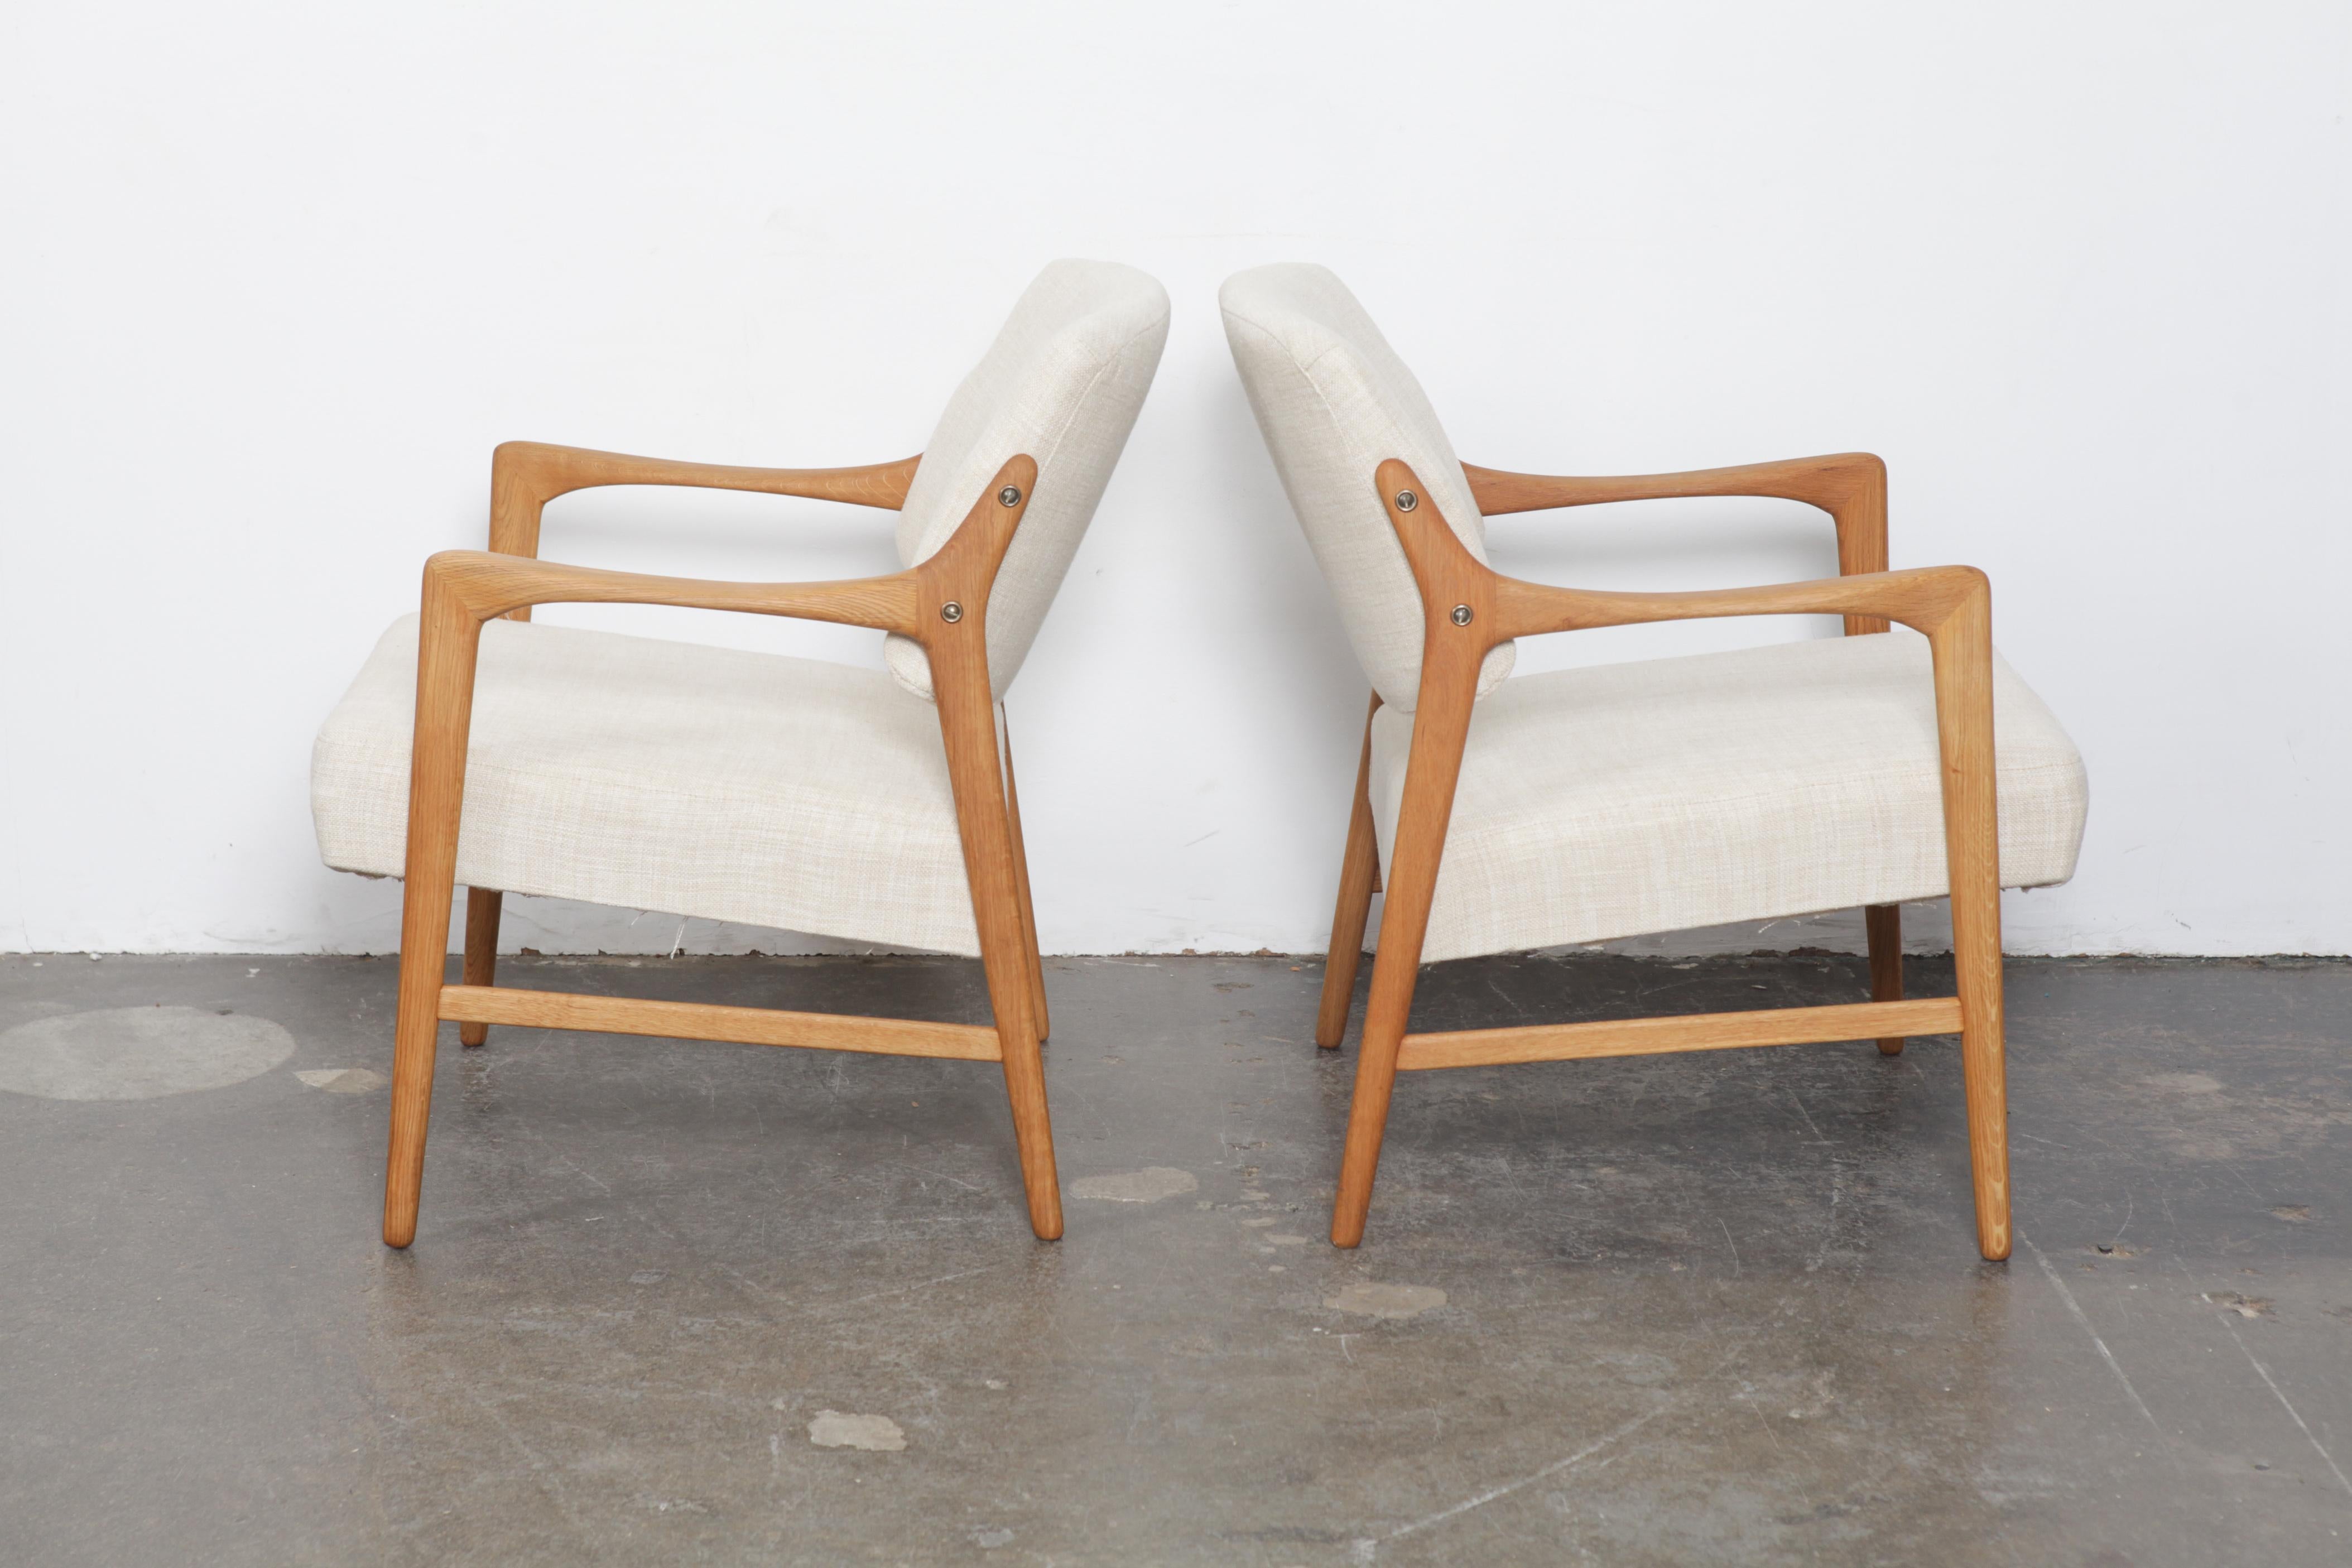 20th Century Pair of Swedish Solid Oak Chairs by Inge Andersson for Bröderna Andersson